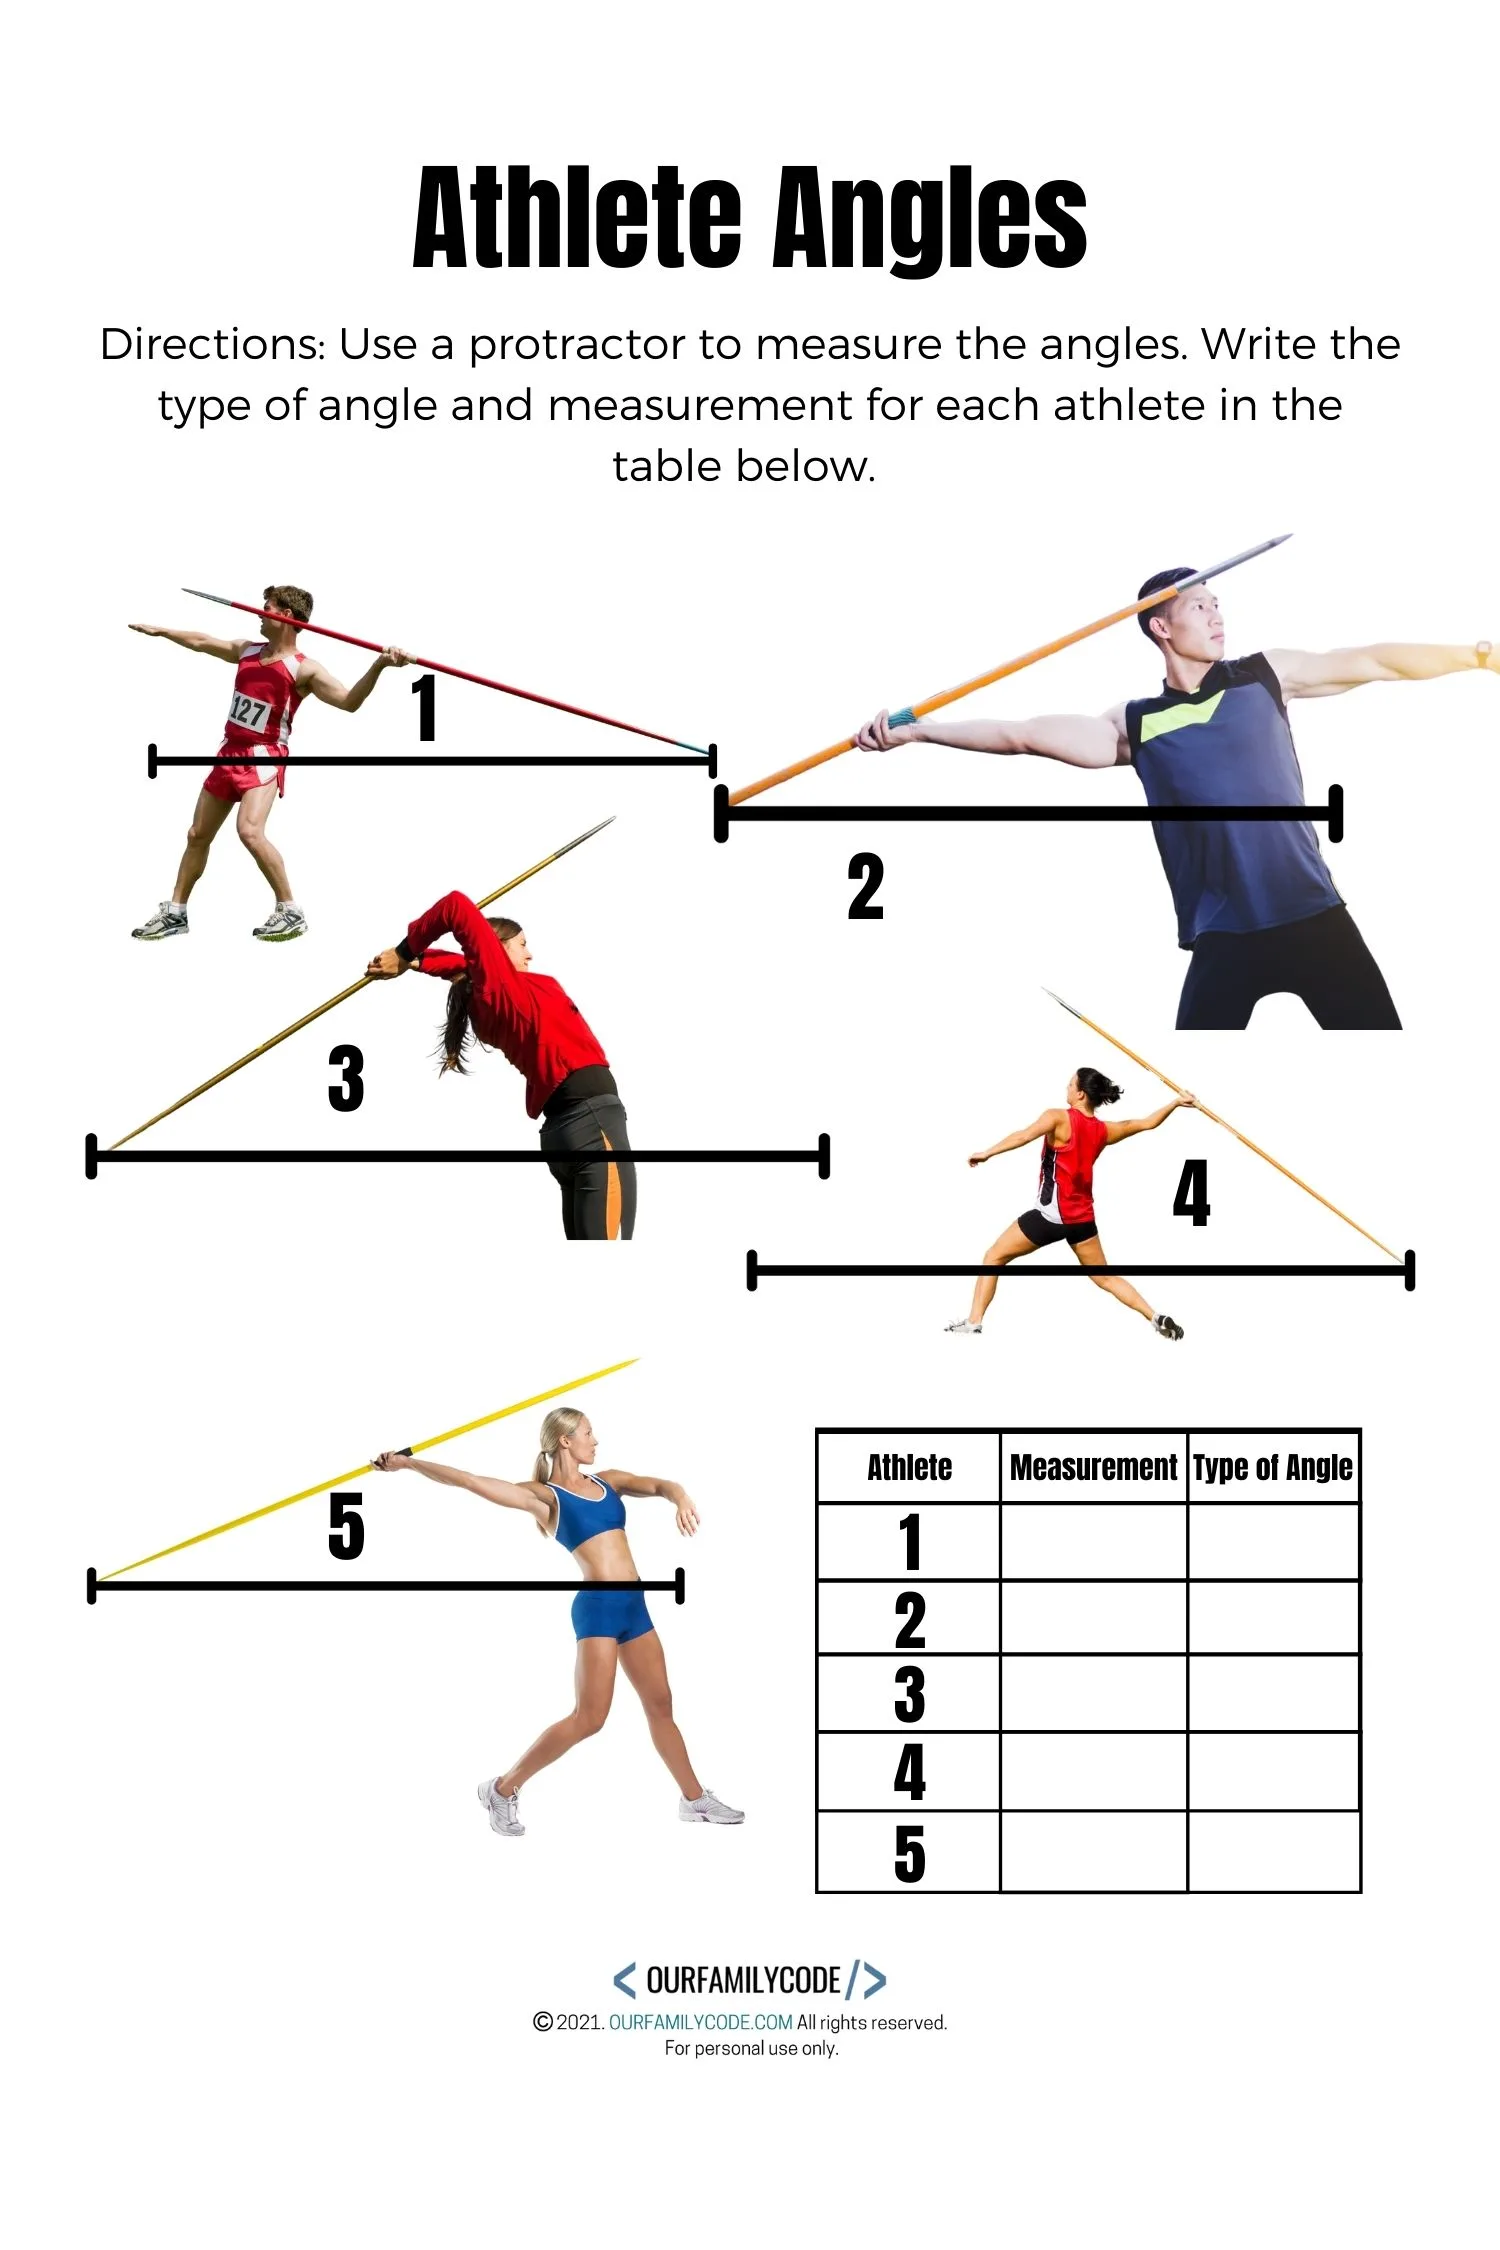 javelin athletes angle measurement activity summer olympics math Athletes use angles to analyze their performance. This sports STEM activity challenges kids to measure athlete angles in Olympic Sports.